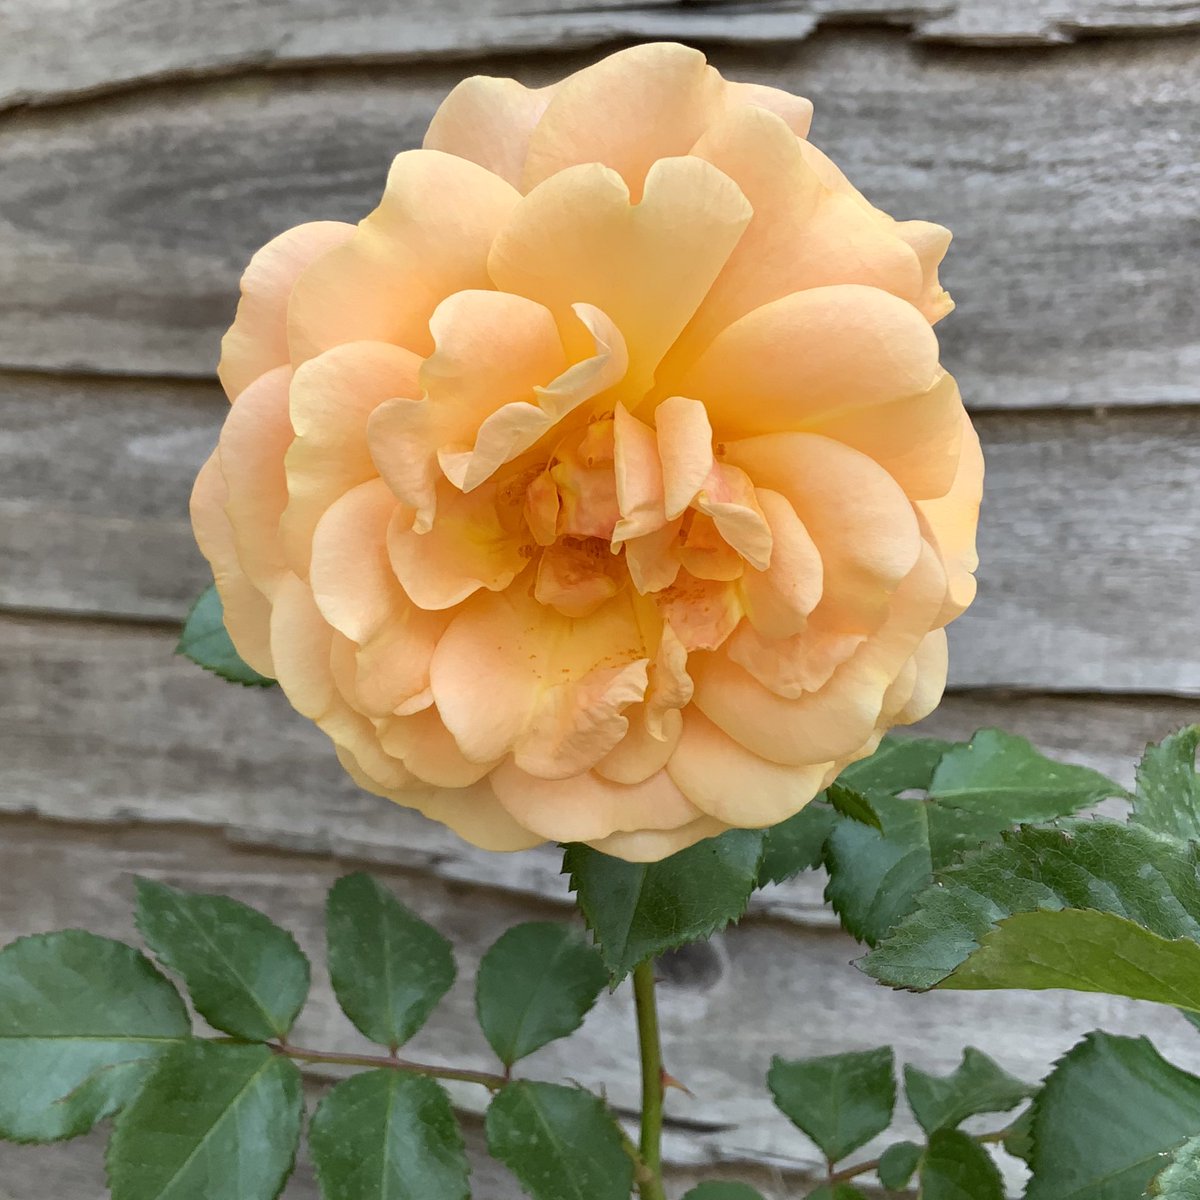 ‘Peach Melba’ looking peachy for #RoseWednesday.
Rose of the Year 2023, bred by Kordes Rosen.
A welcome breeze here on the south coast, hope everyone is cooler today and survived the ferocious heat. 
#roses #roseoftheyear 
@loujnicholls @kgimson